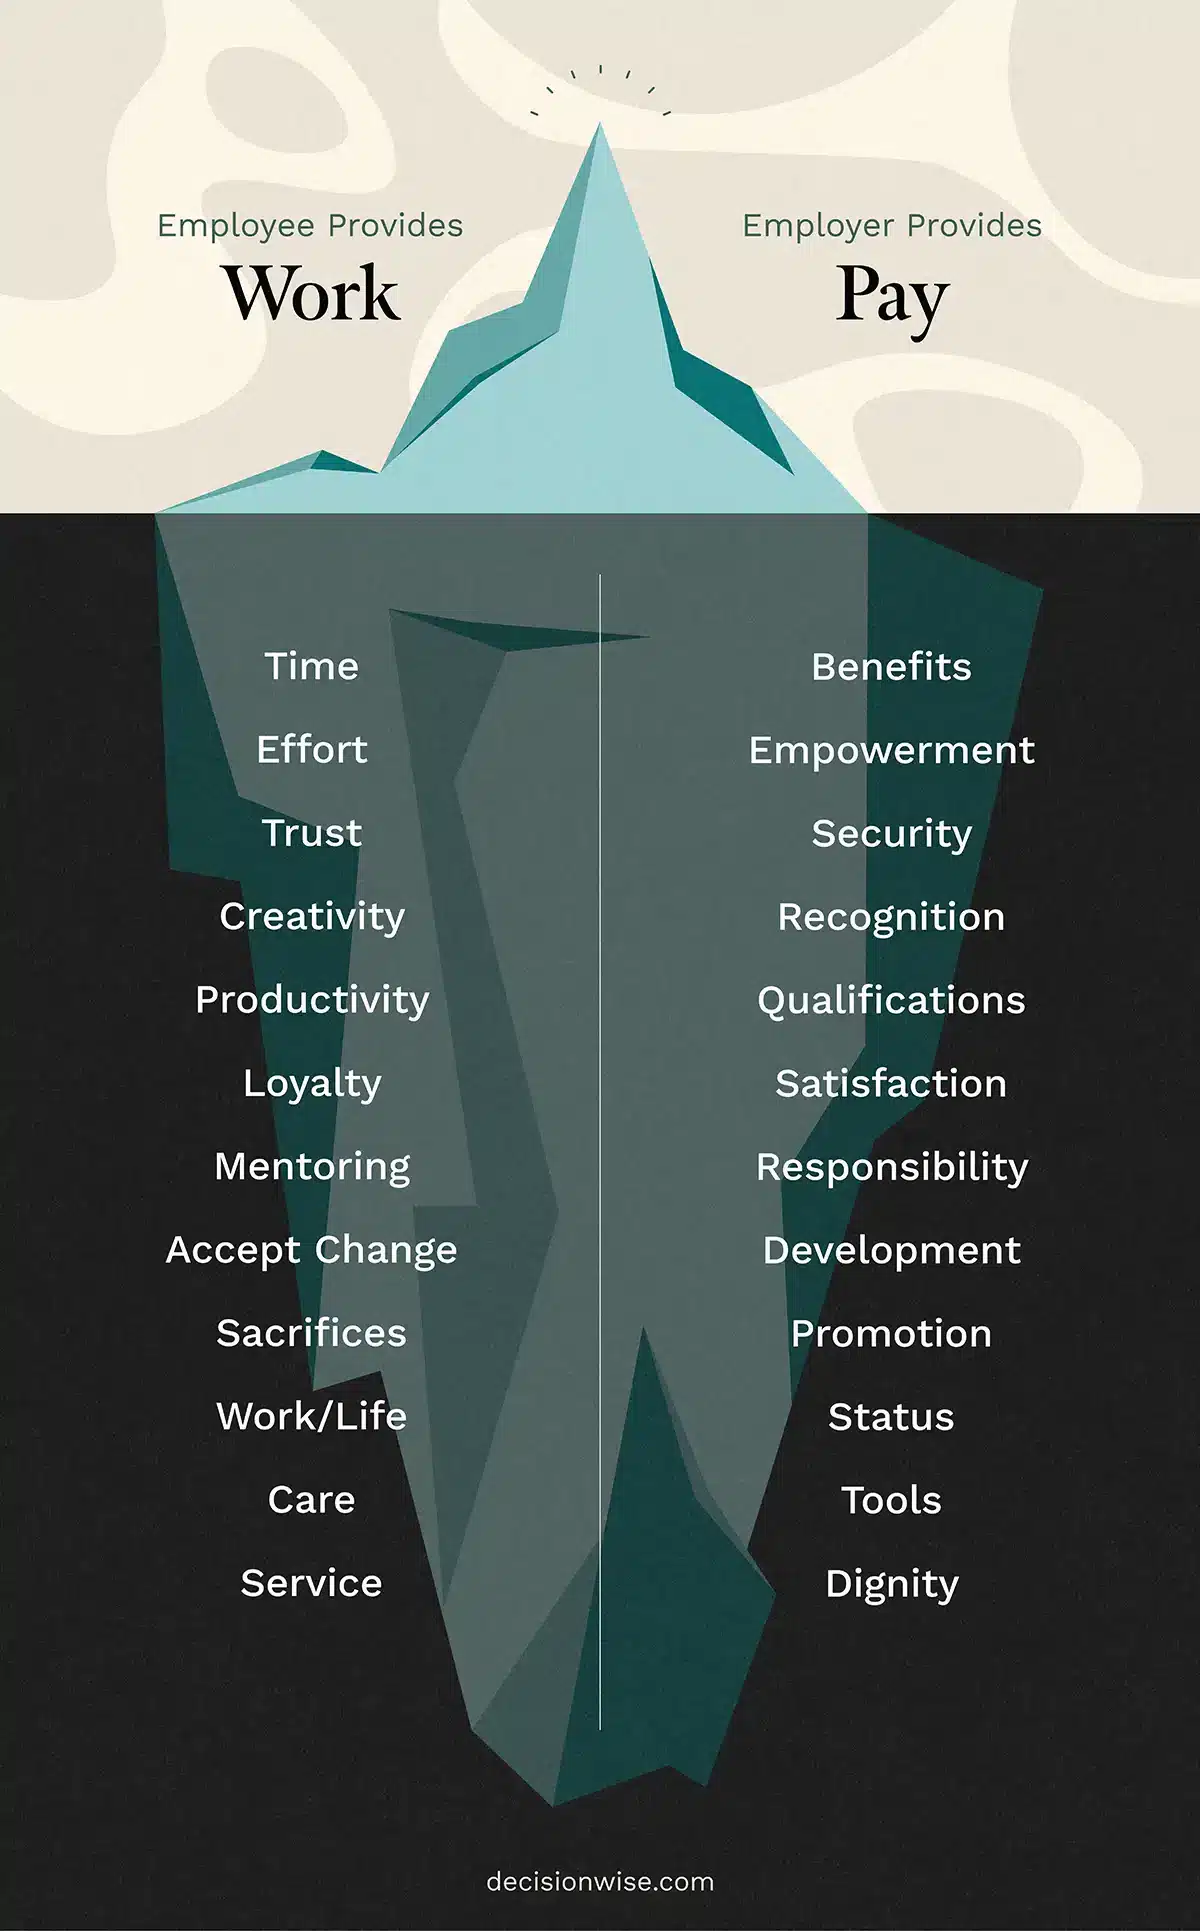 The psychological contract between employee and employer as depicted by an iceberg